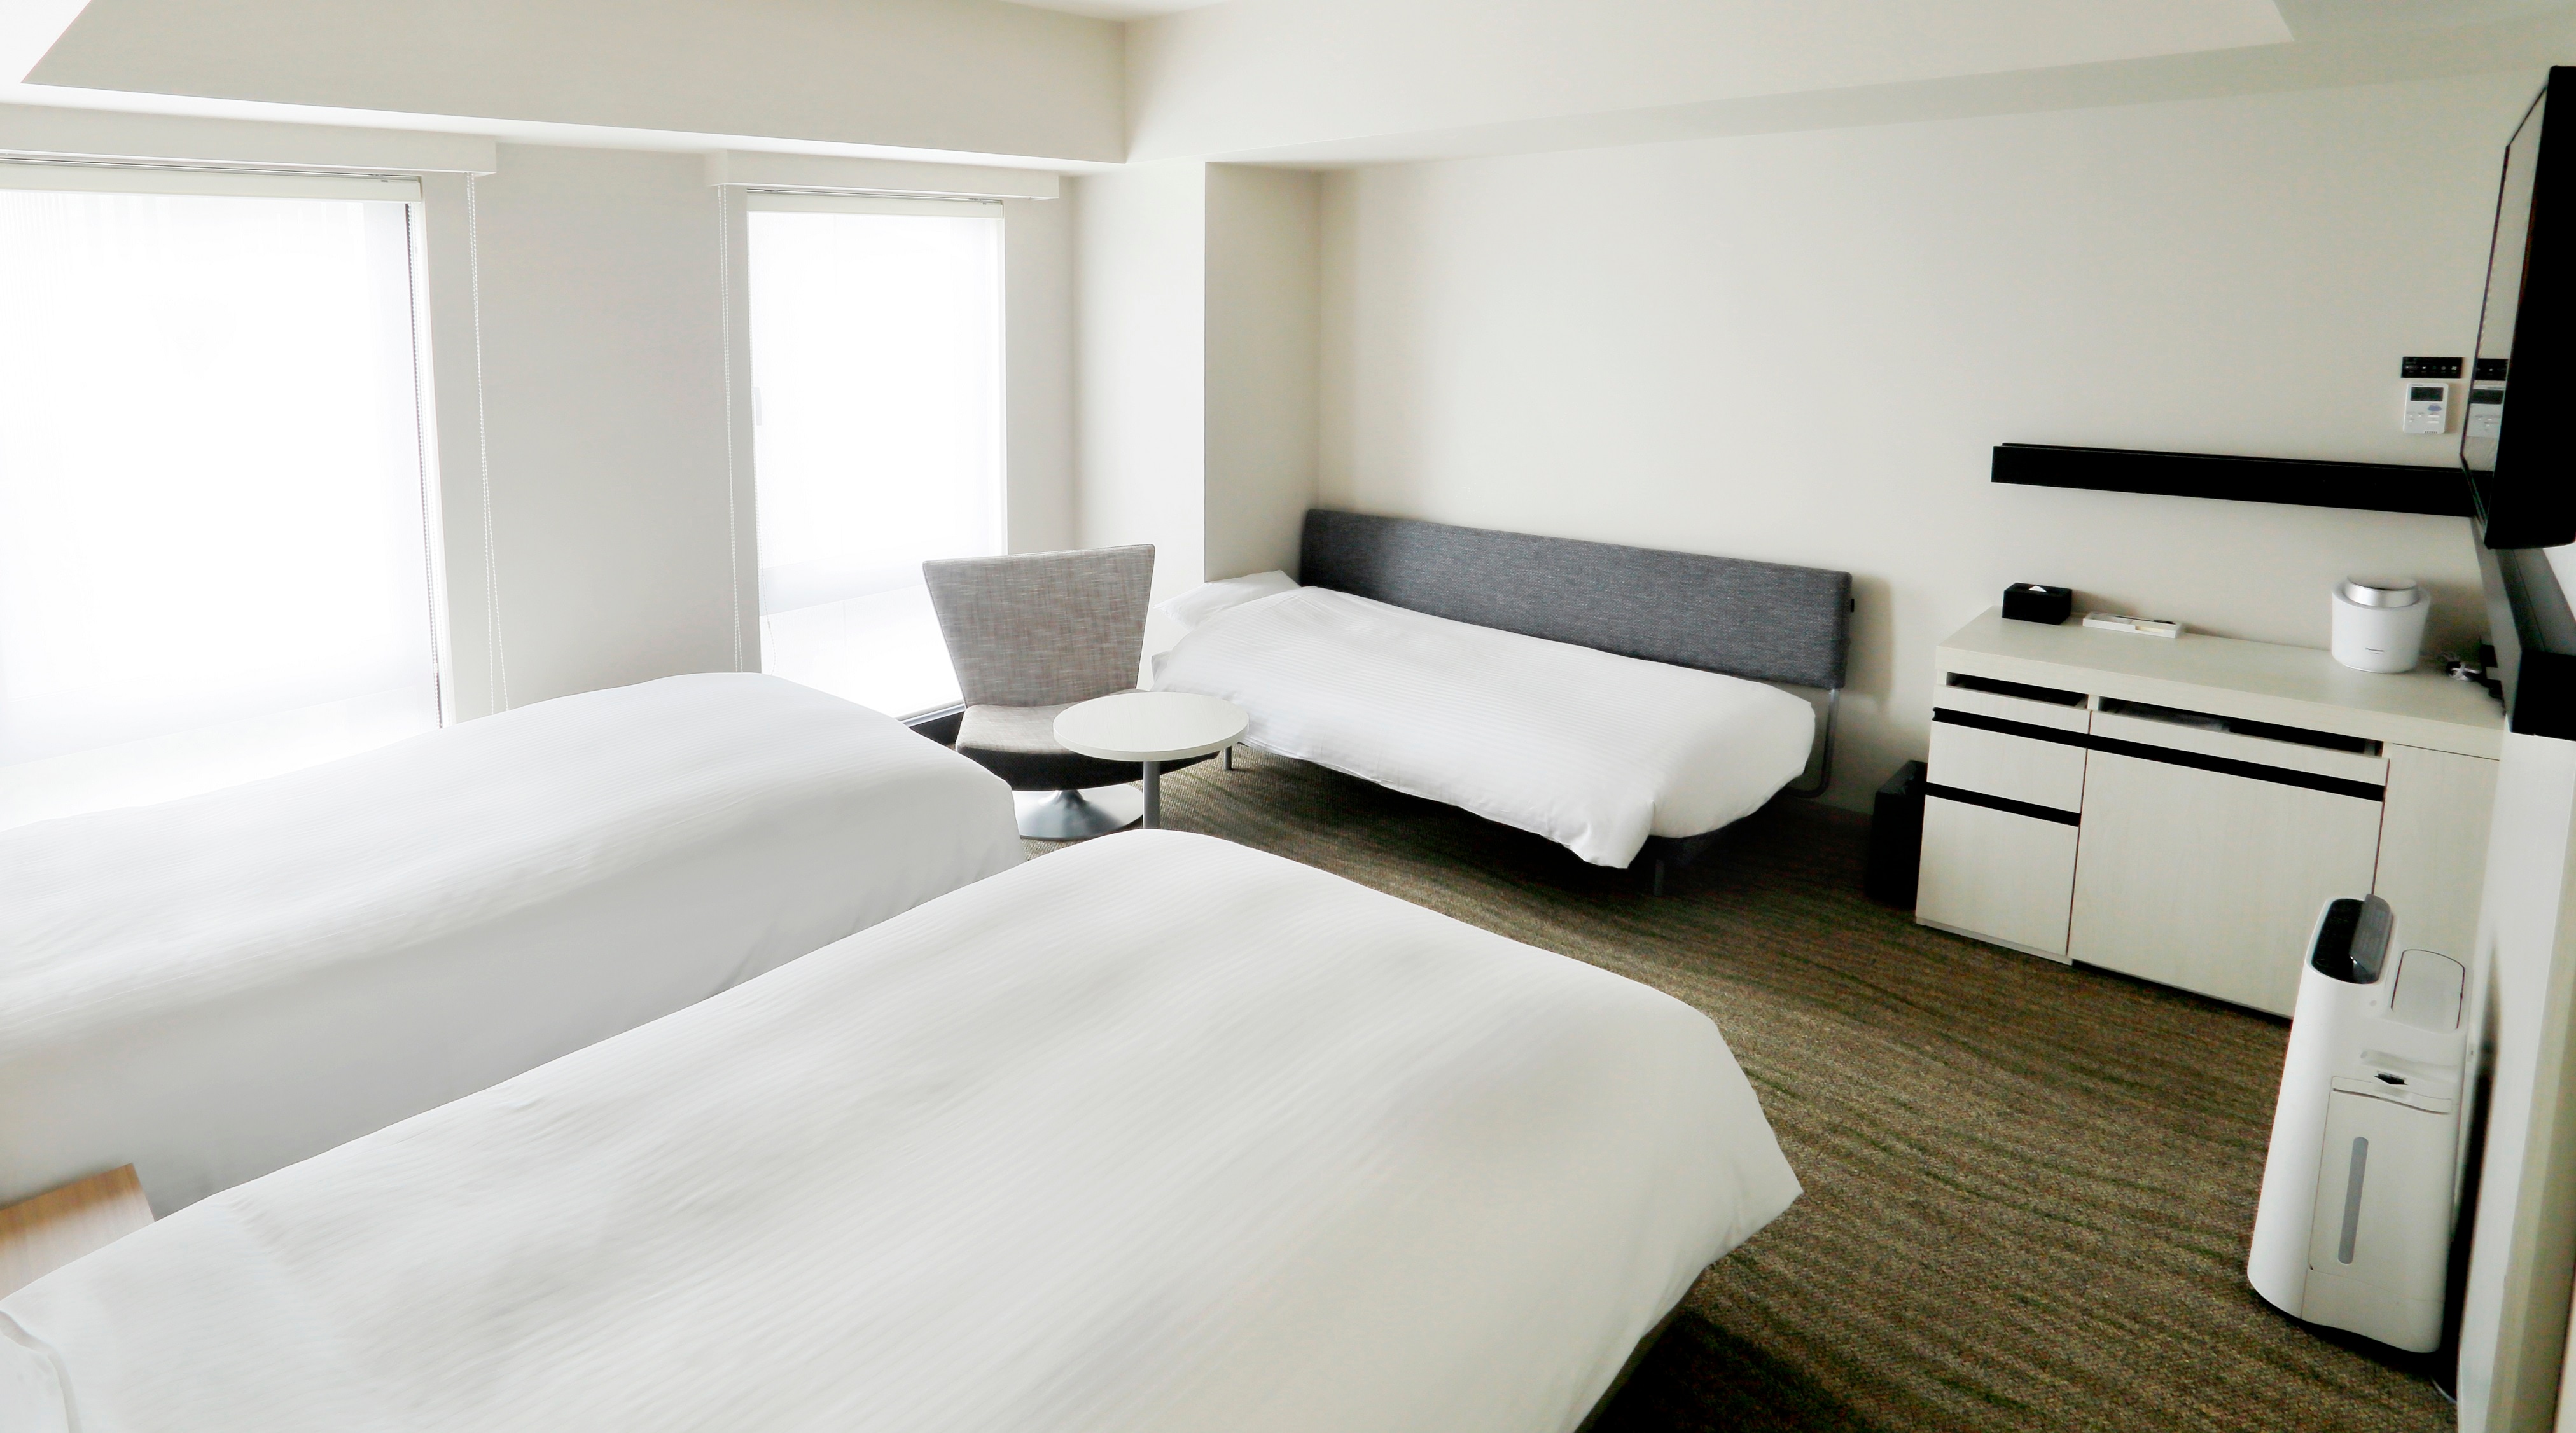 ■ Premier Twin Room (when using a sofa bed) ■ With a sofa bed, it can accommodate up to 3 adults